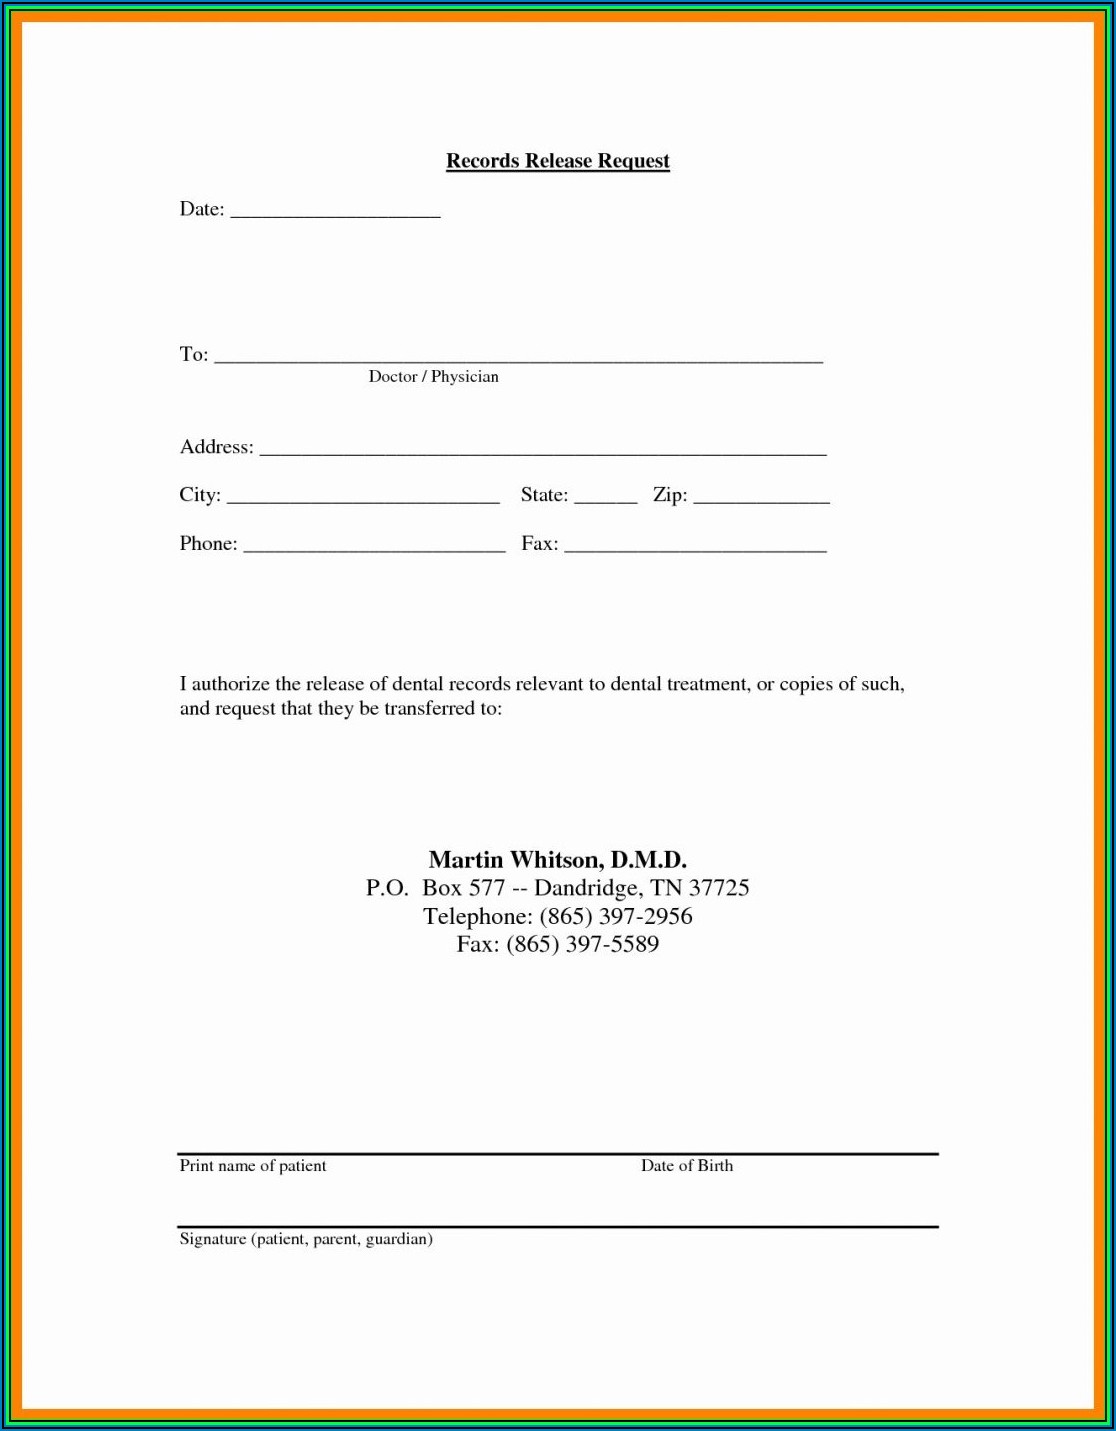 Hipaa Compliant Medical Authorization Form Online